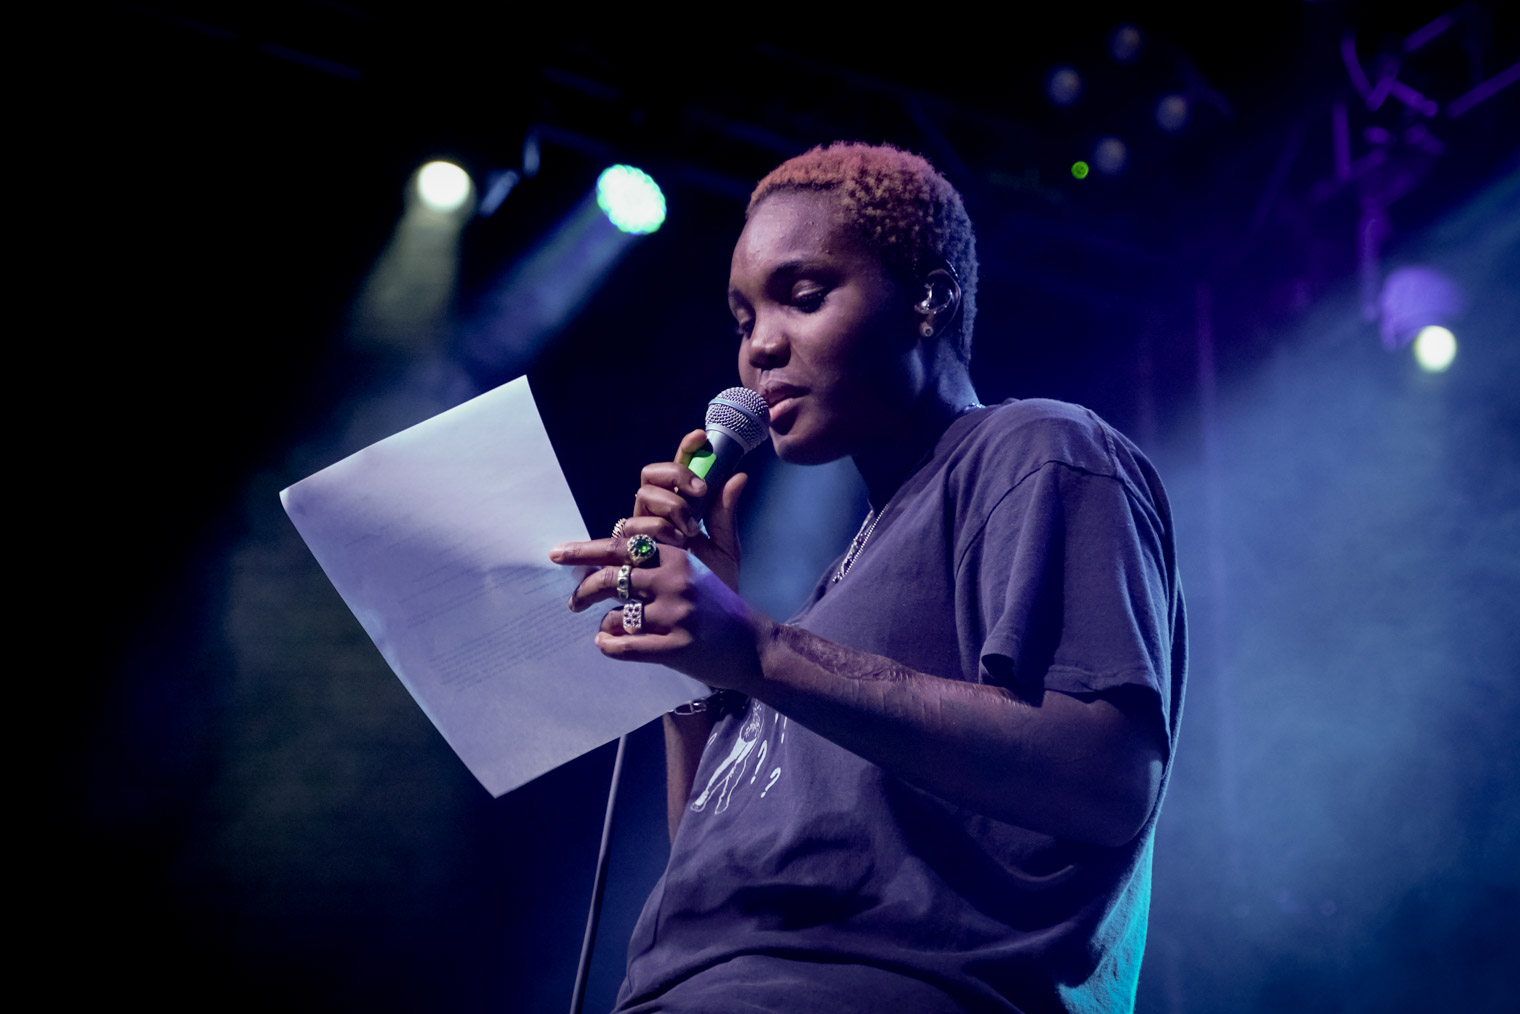 A musician and poet reading a poem on stage